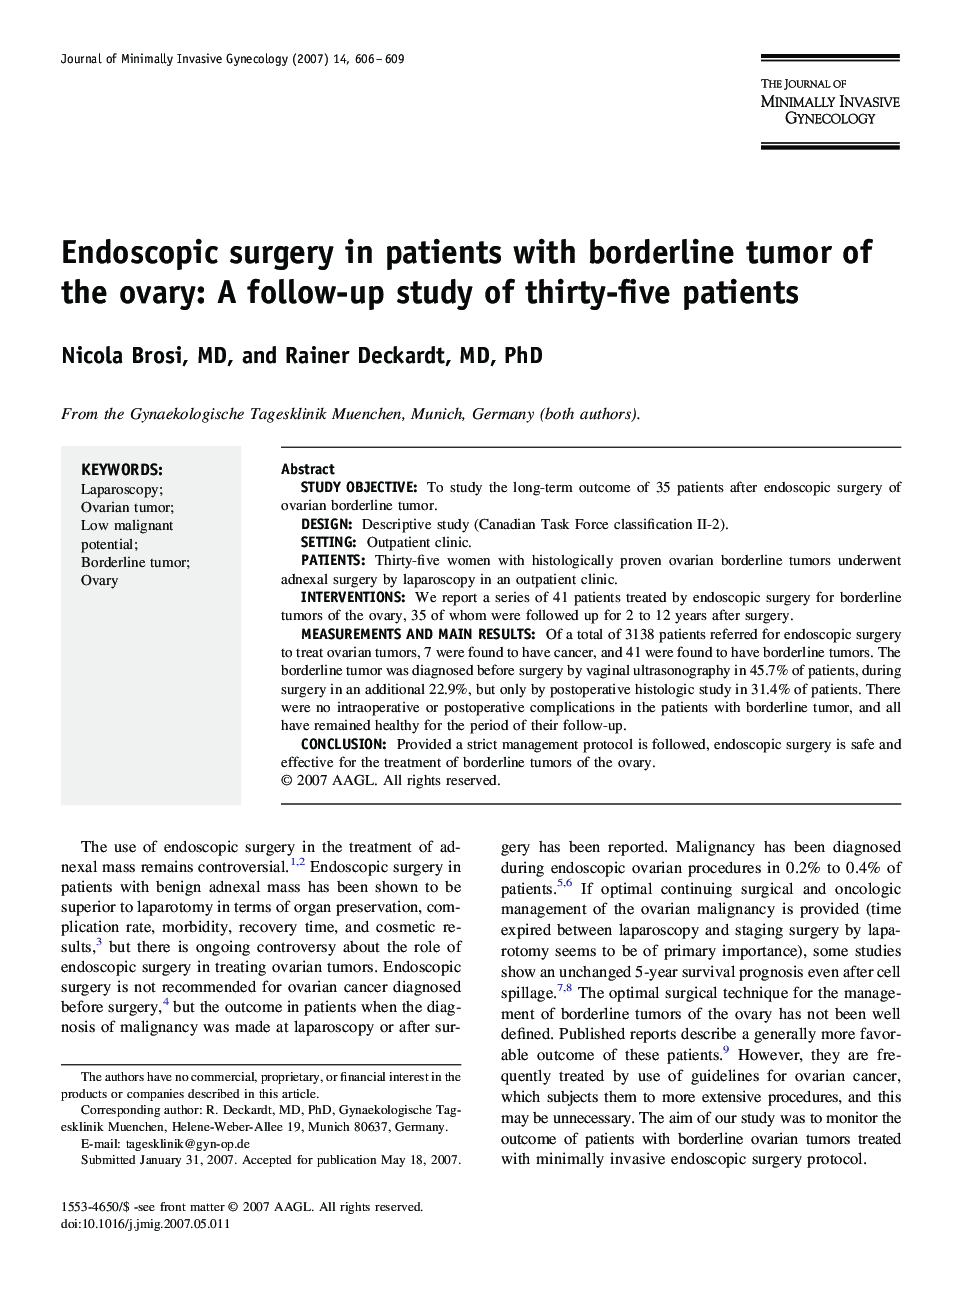 Endoscopic surgery in patients with borderline tumor of the ovary: A follow-up study of thirty-five patients 